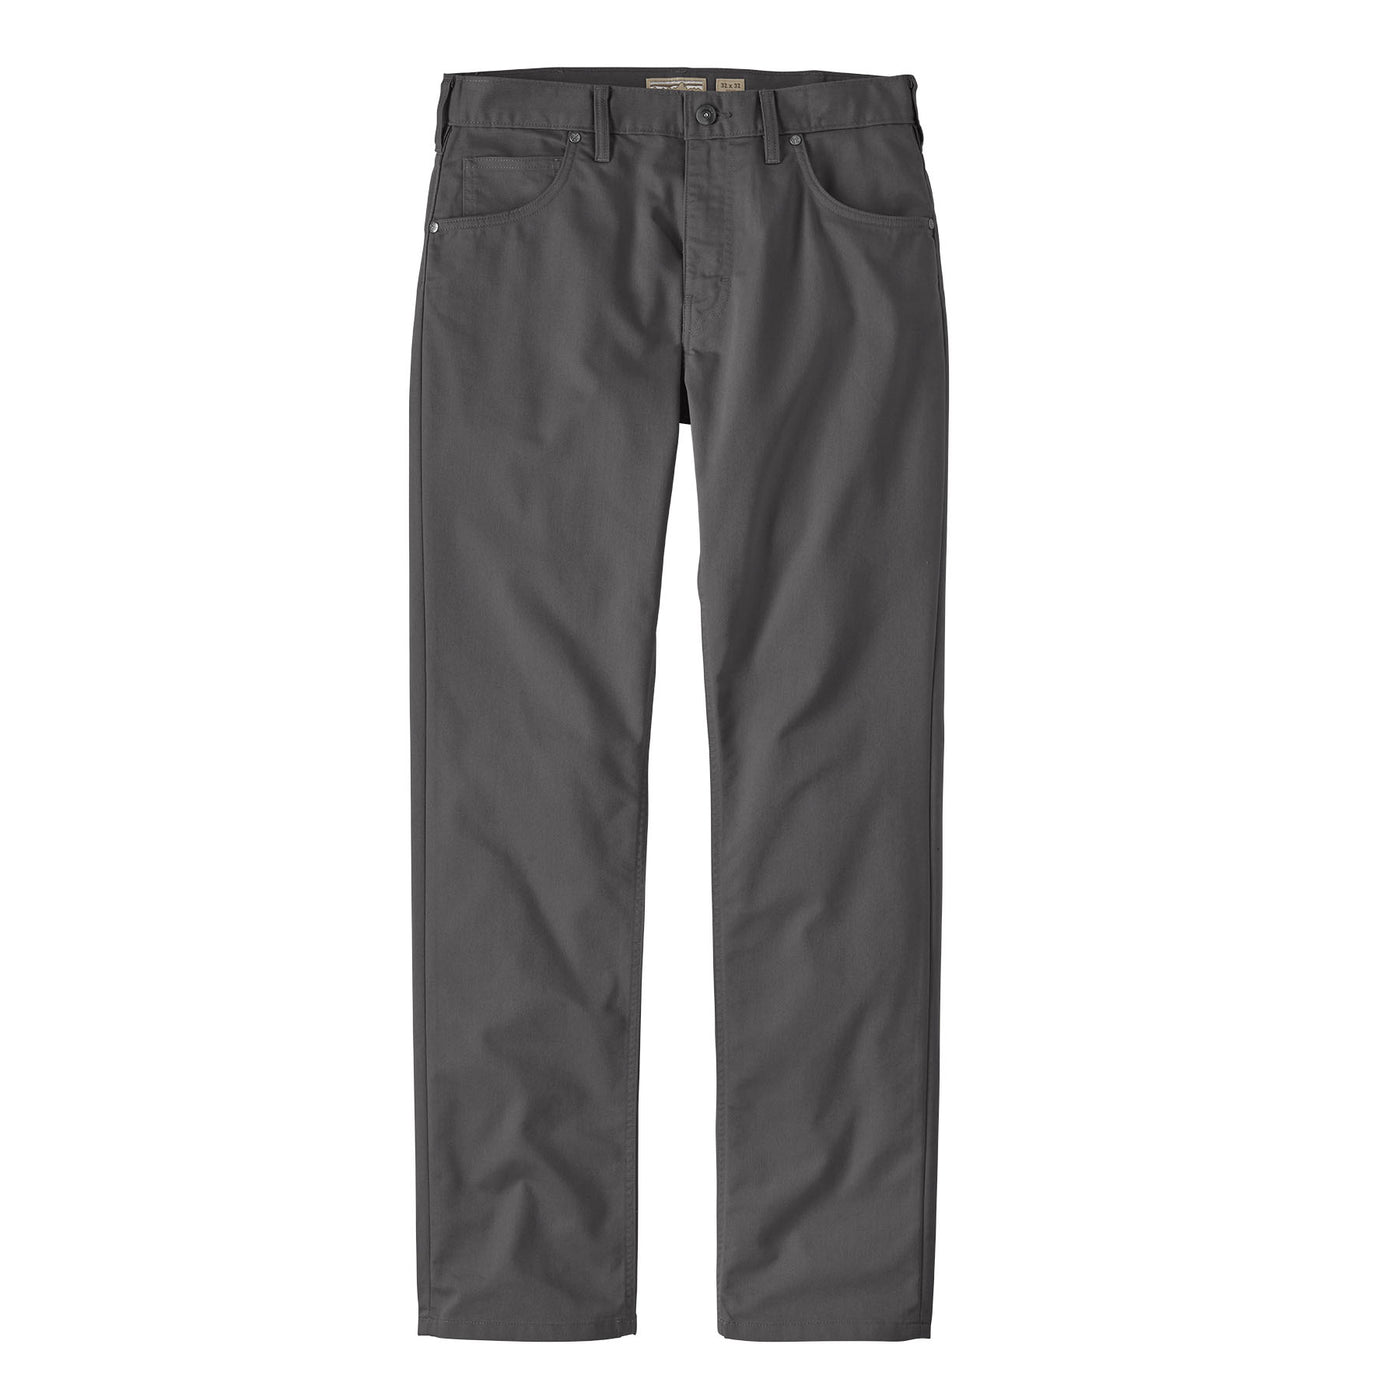 PATAGONIA Men's Performance Twill Jeans / Forge Grey FGE / 30